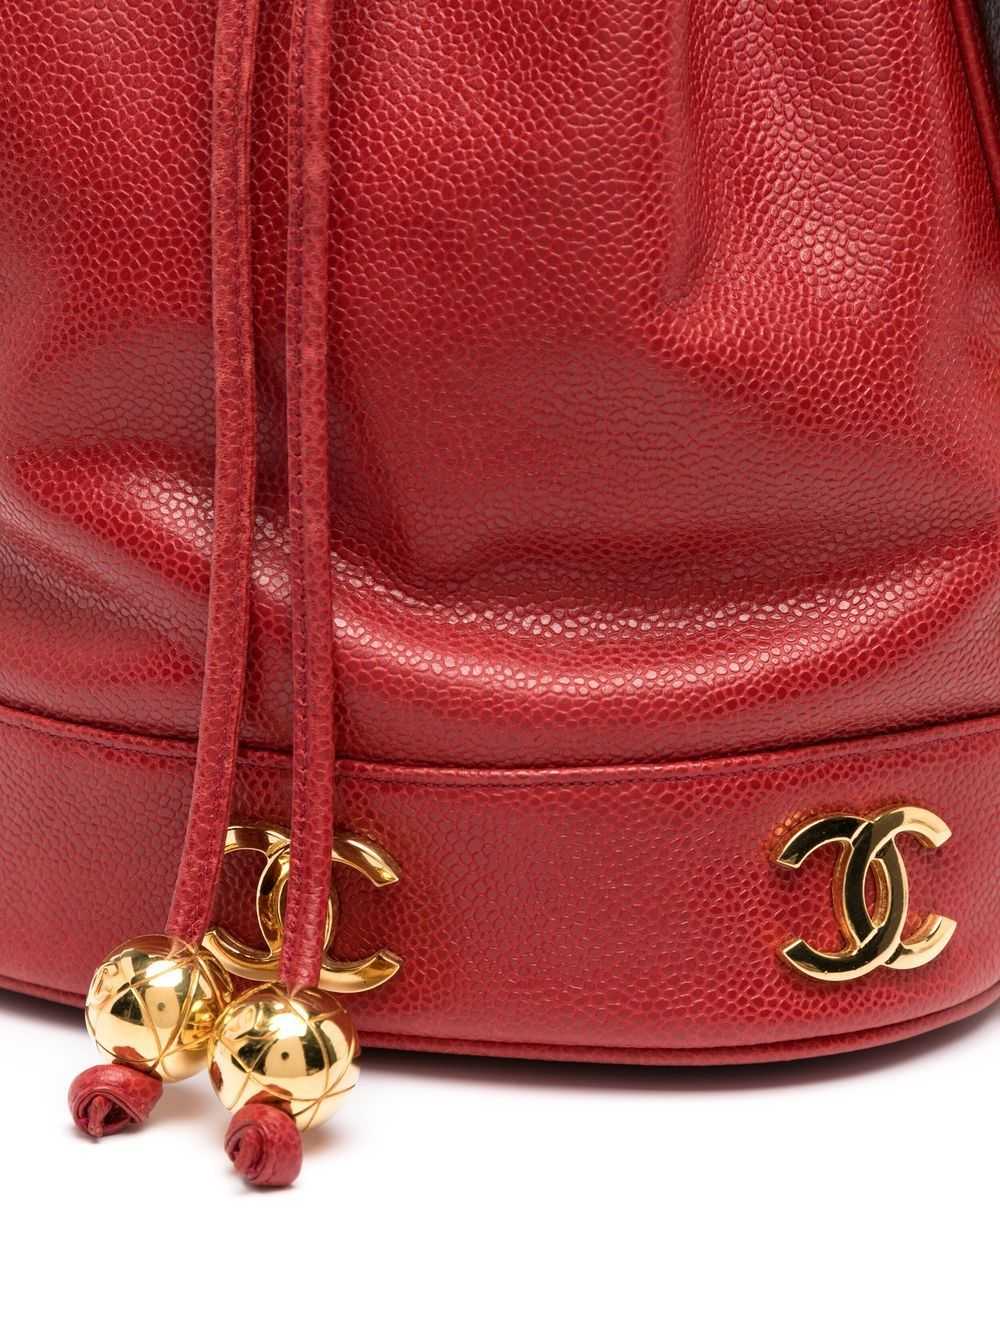 CHANEL Pre-Owned 1992 Triple CC bag - Red - image 4